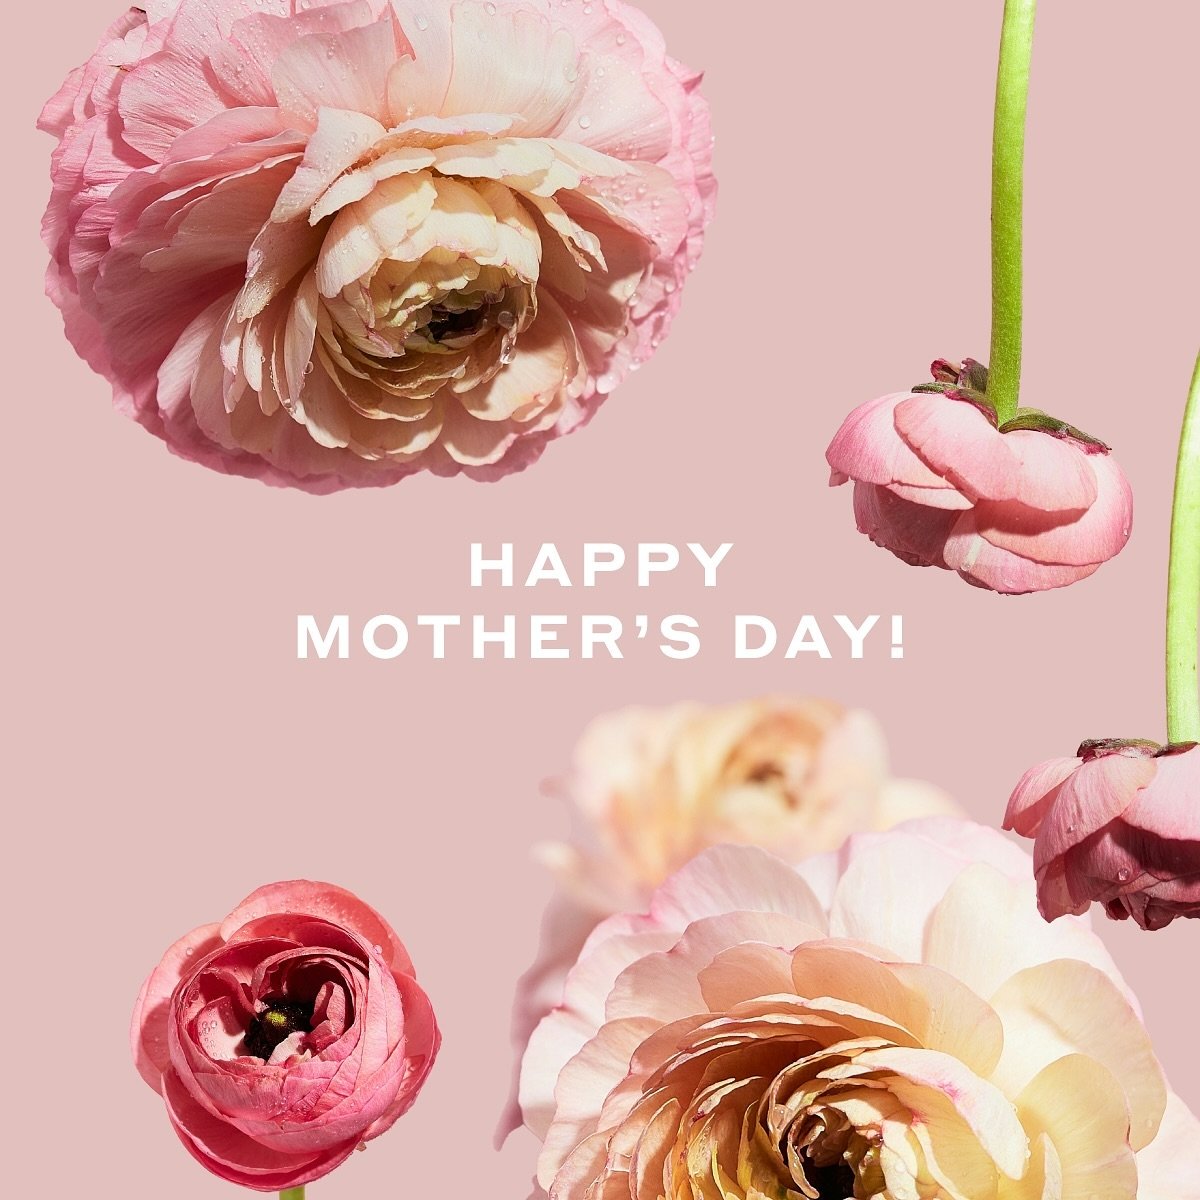 To all of the mothers and mother figures - this one's for you. Happy Mother's Day! 💛

#mothersday